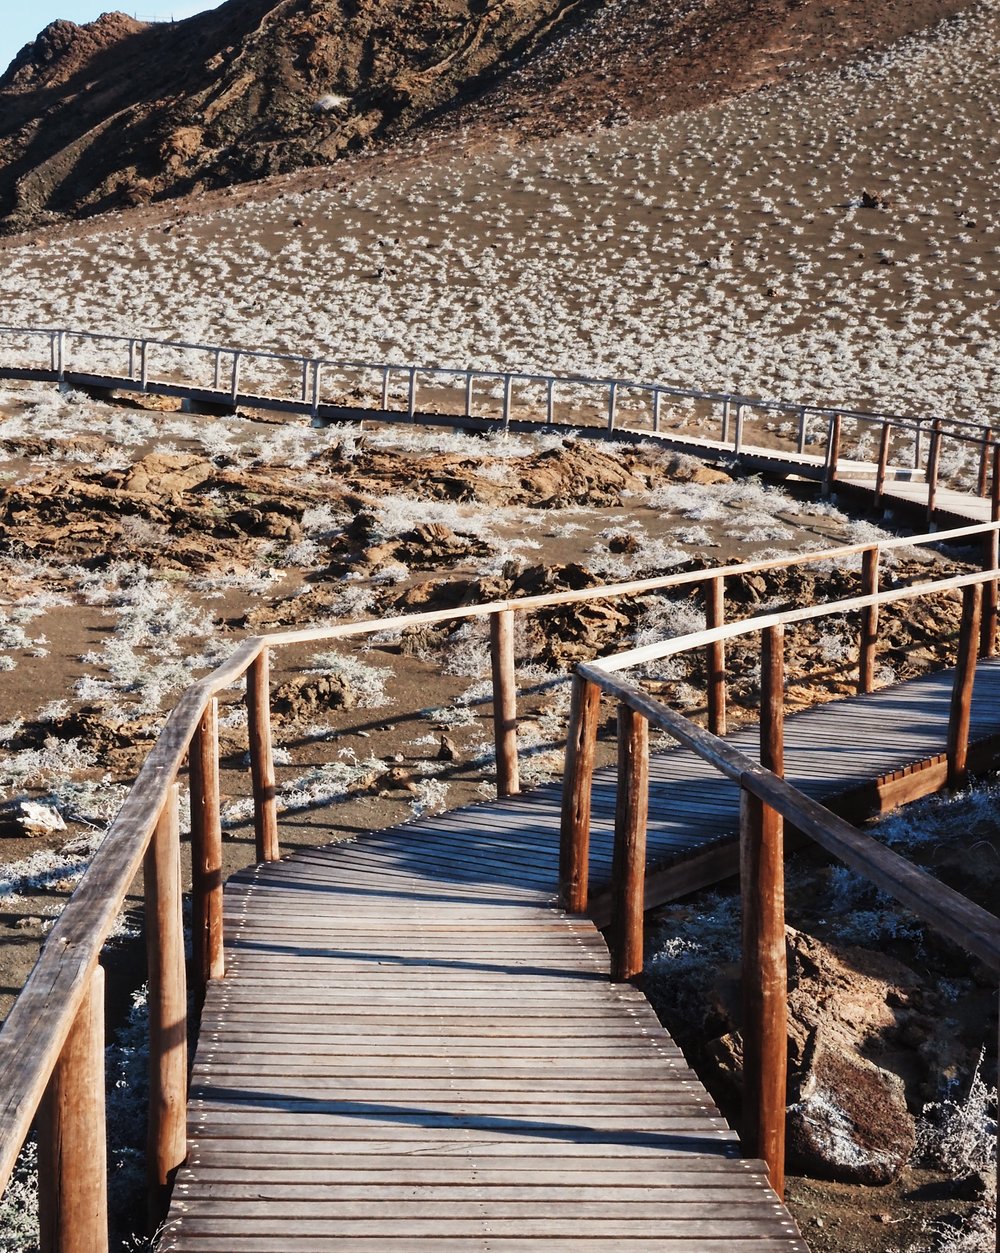  wooden path and stairs, Bartolomé Island 